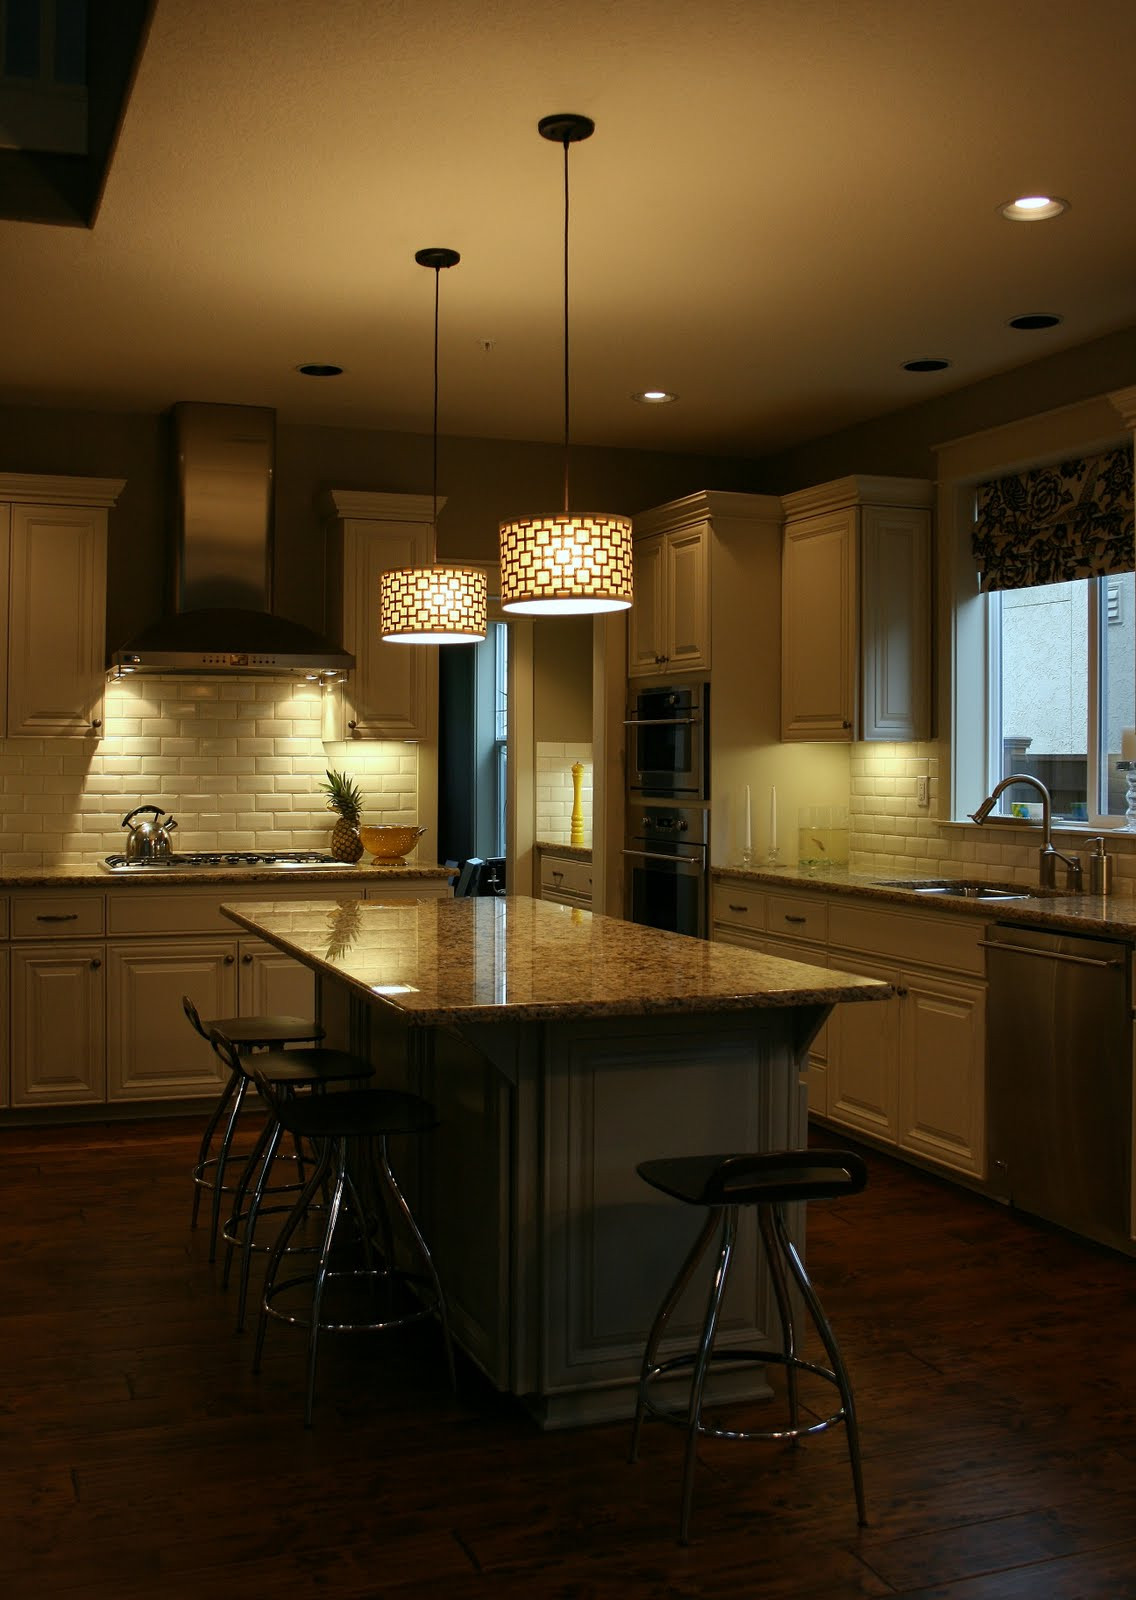 Light Fixtures Over Kitchen Island
 Kitchen Island Lighting System with Pendant and Chandelier